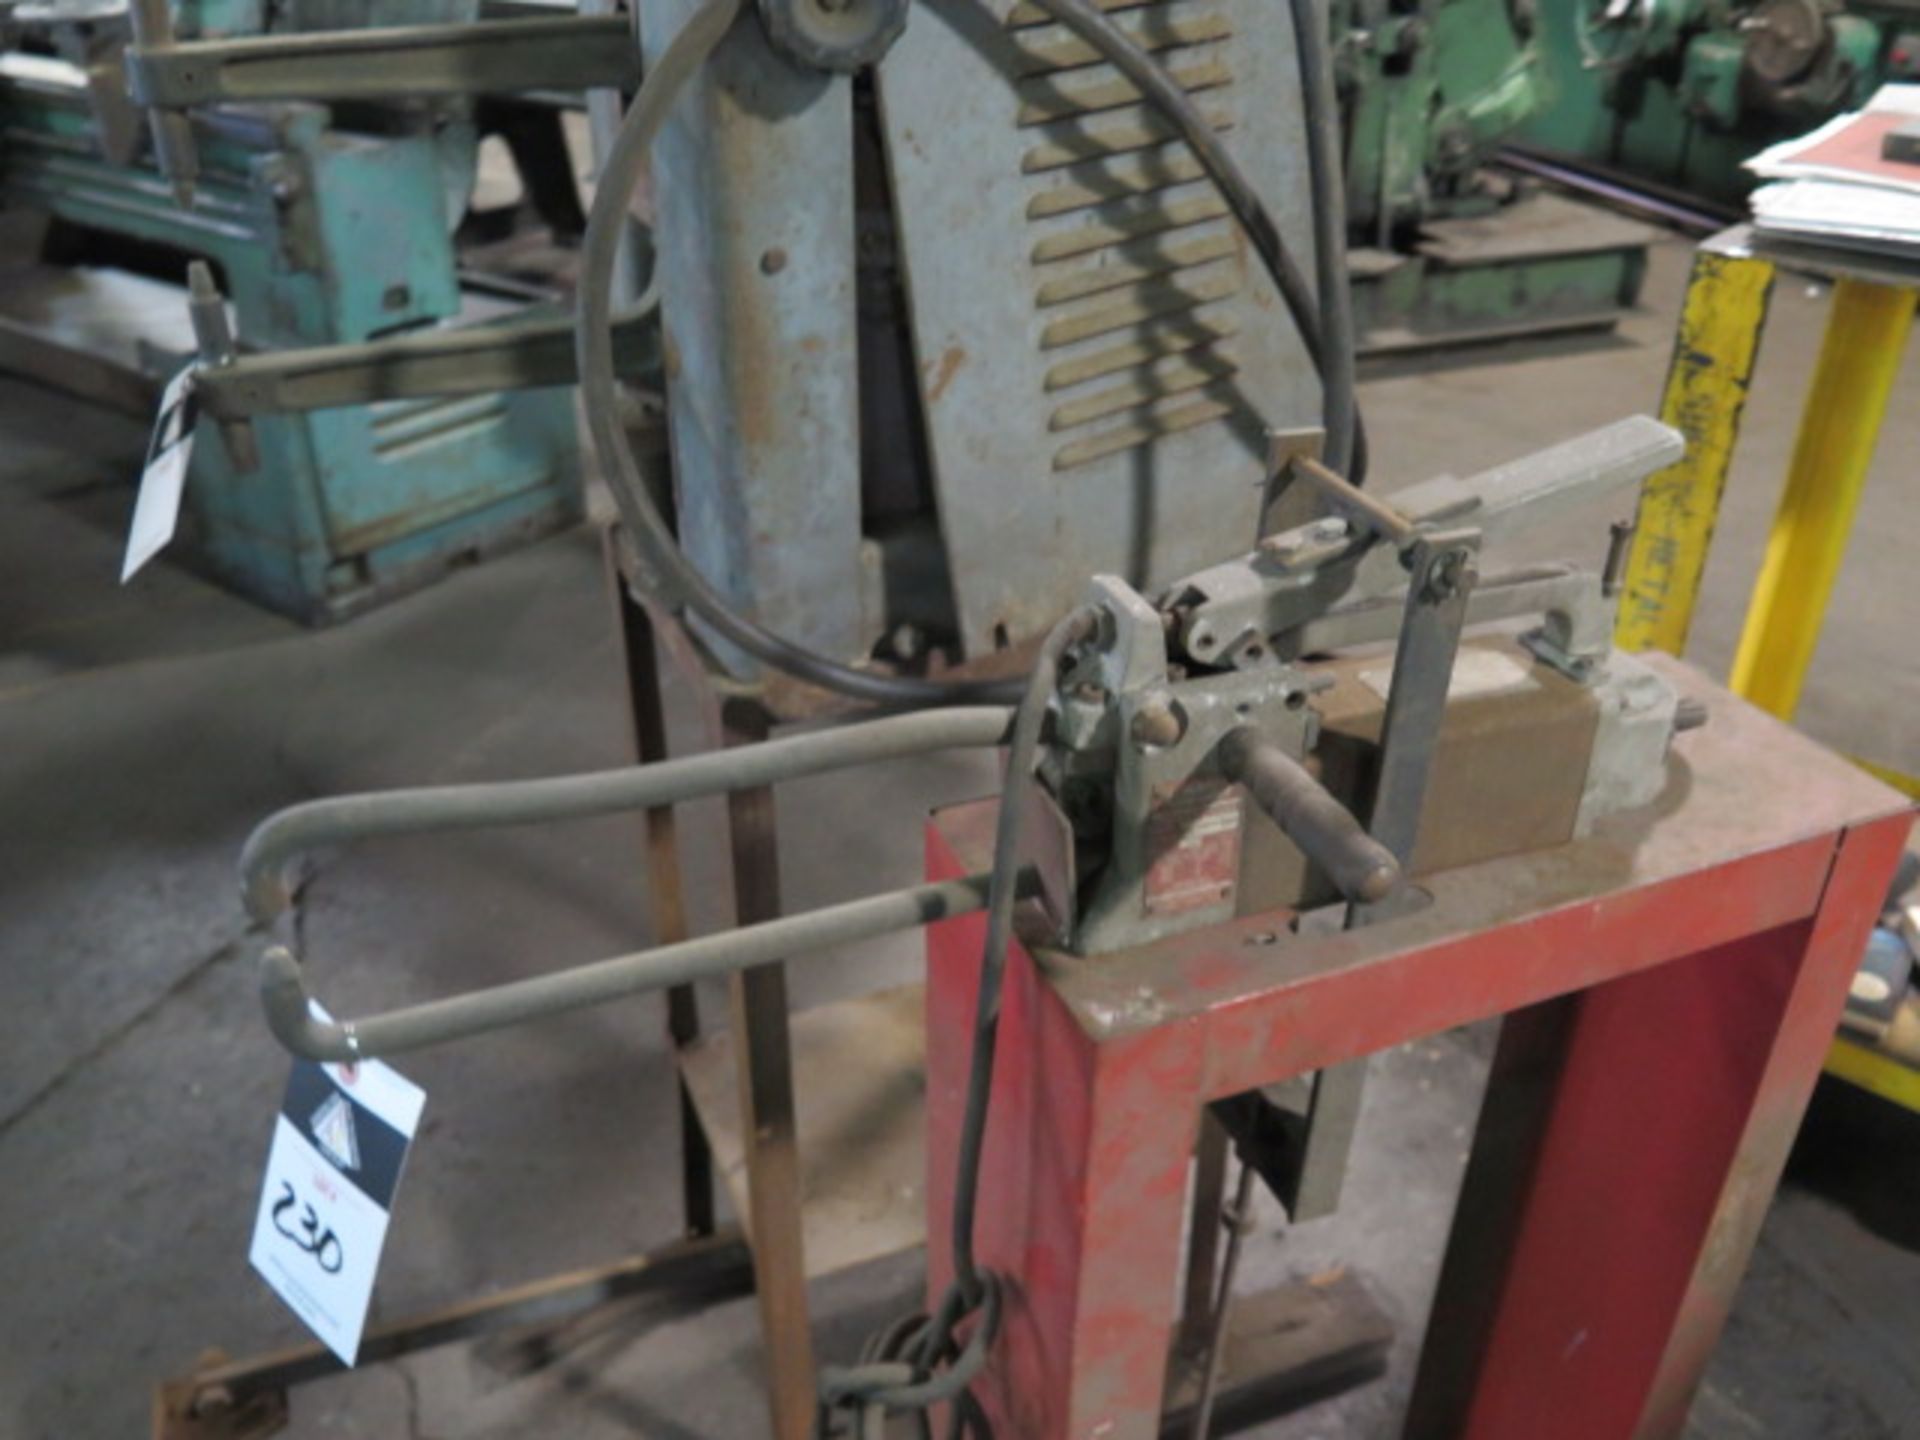 Dayton mdl. 22544 1.5kVA Portable Spot Welder w/ Stand (SOLD AS-IS - NO WARRANTY) - Image 3 of 6